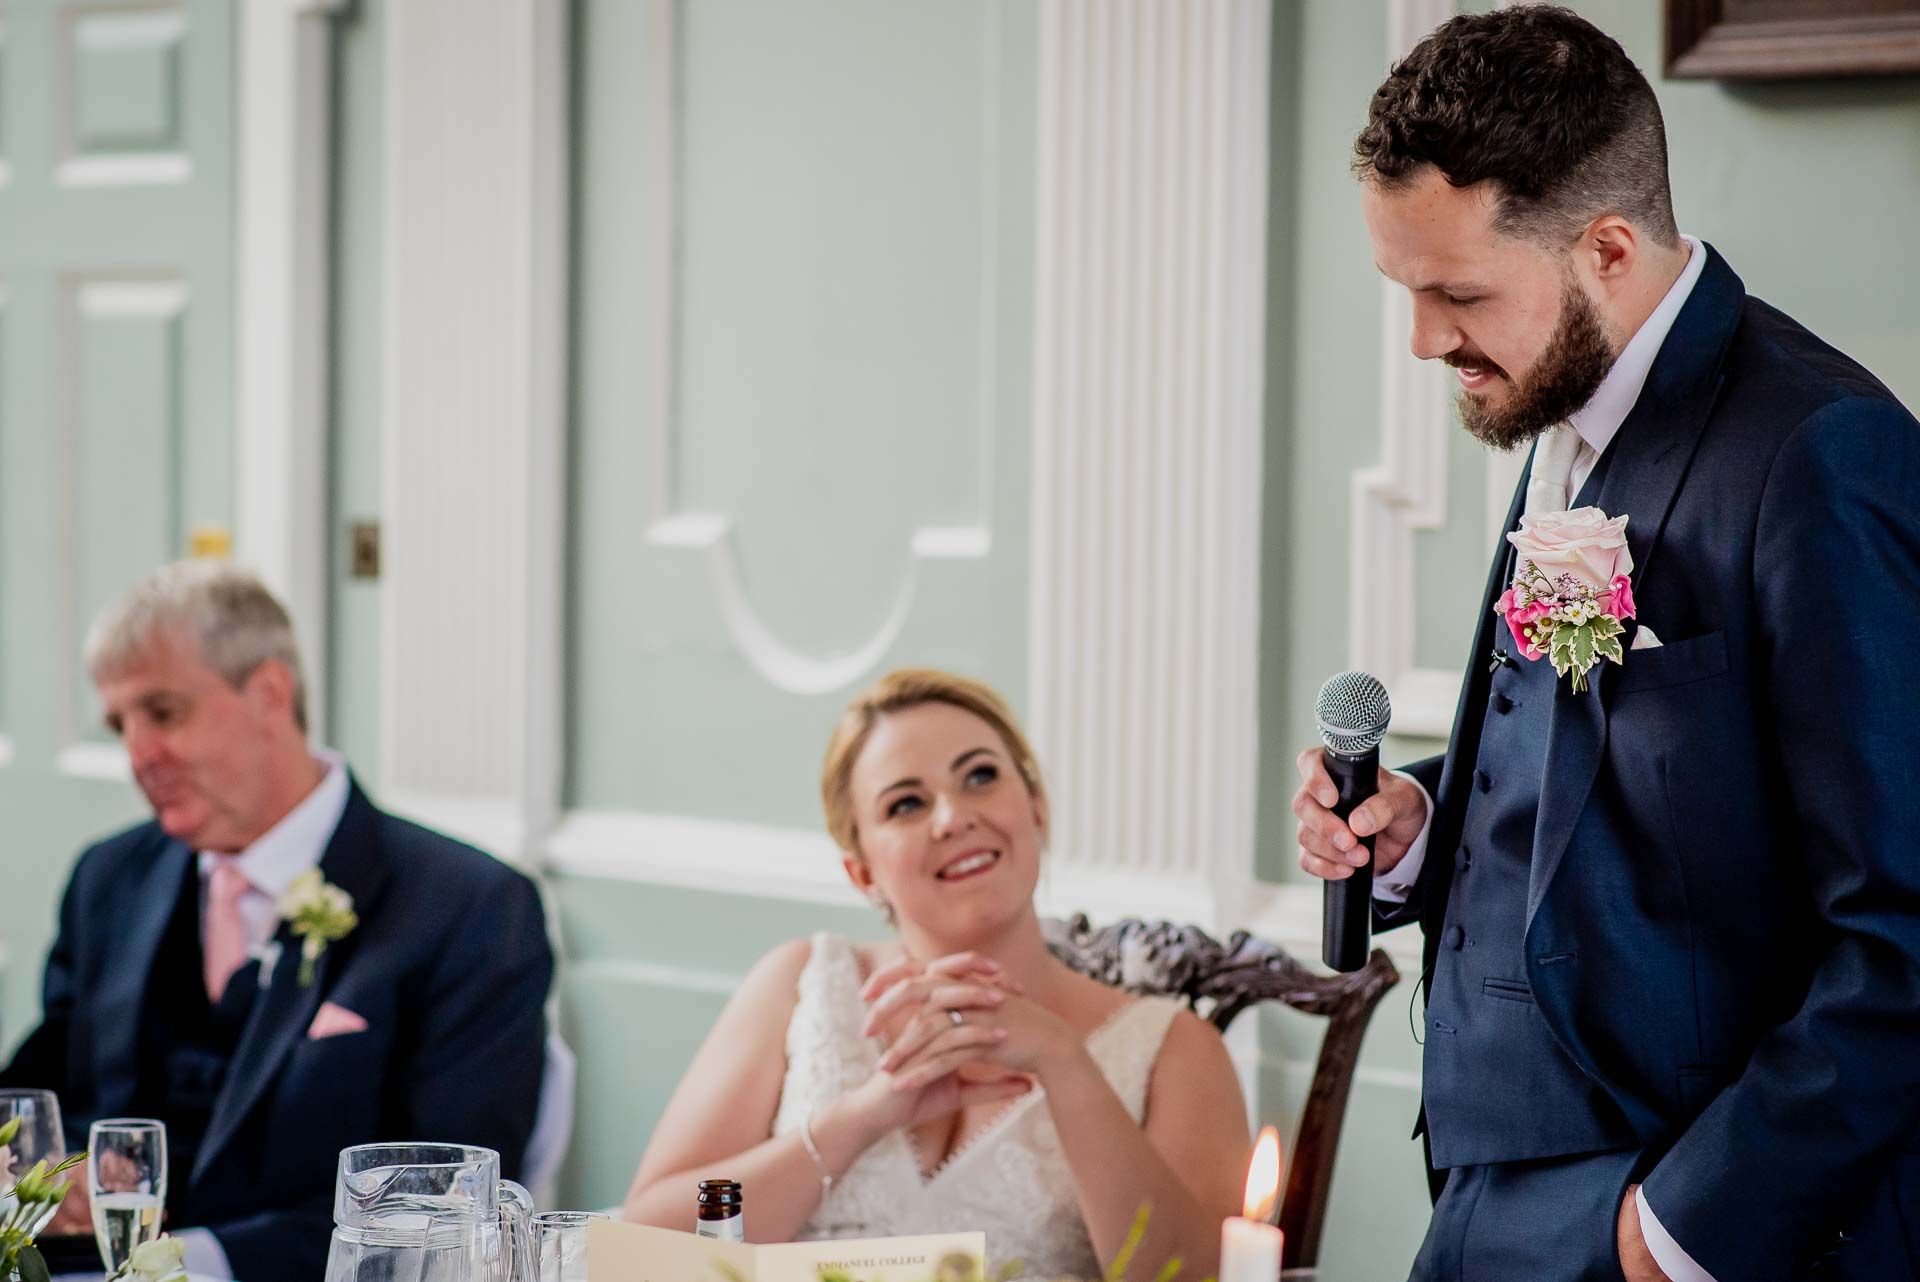 Nic giving his speech with his bride Leah watching and her Dad in the background. Beautiful, natural wedding photo by Damien Vickers Photography. 